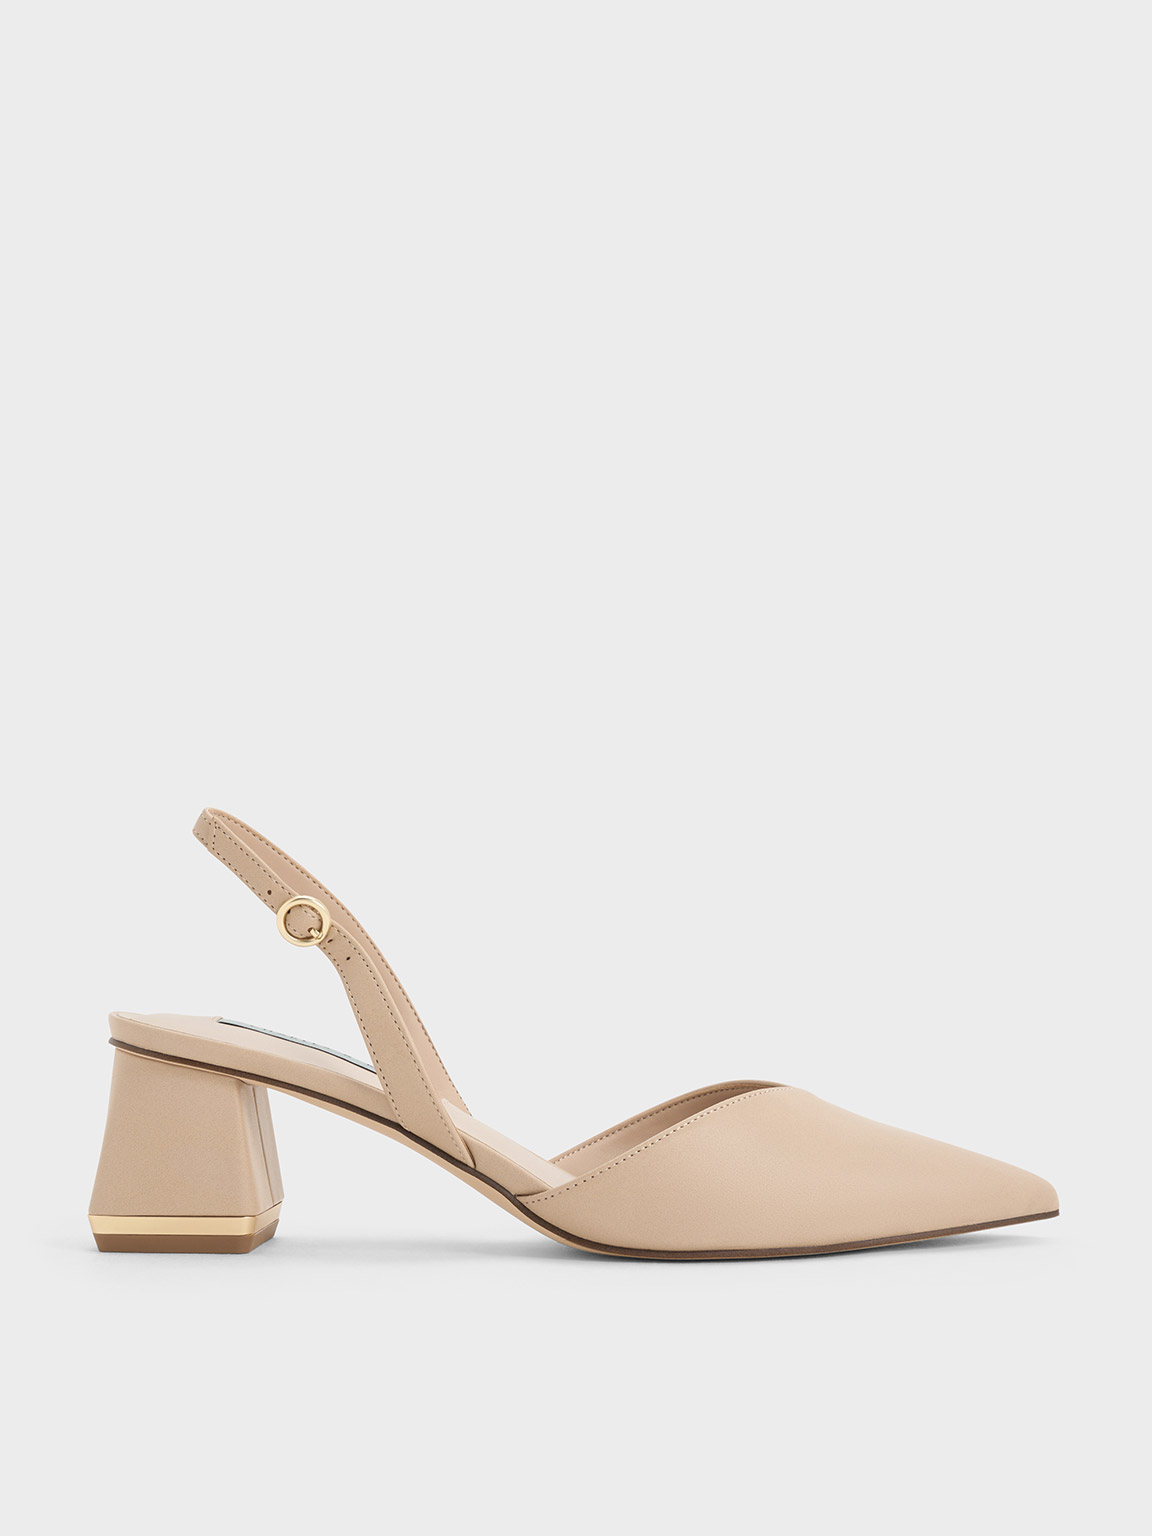 Shop Women's Chunky Sole Shoes | CHARLES & KEITH US